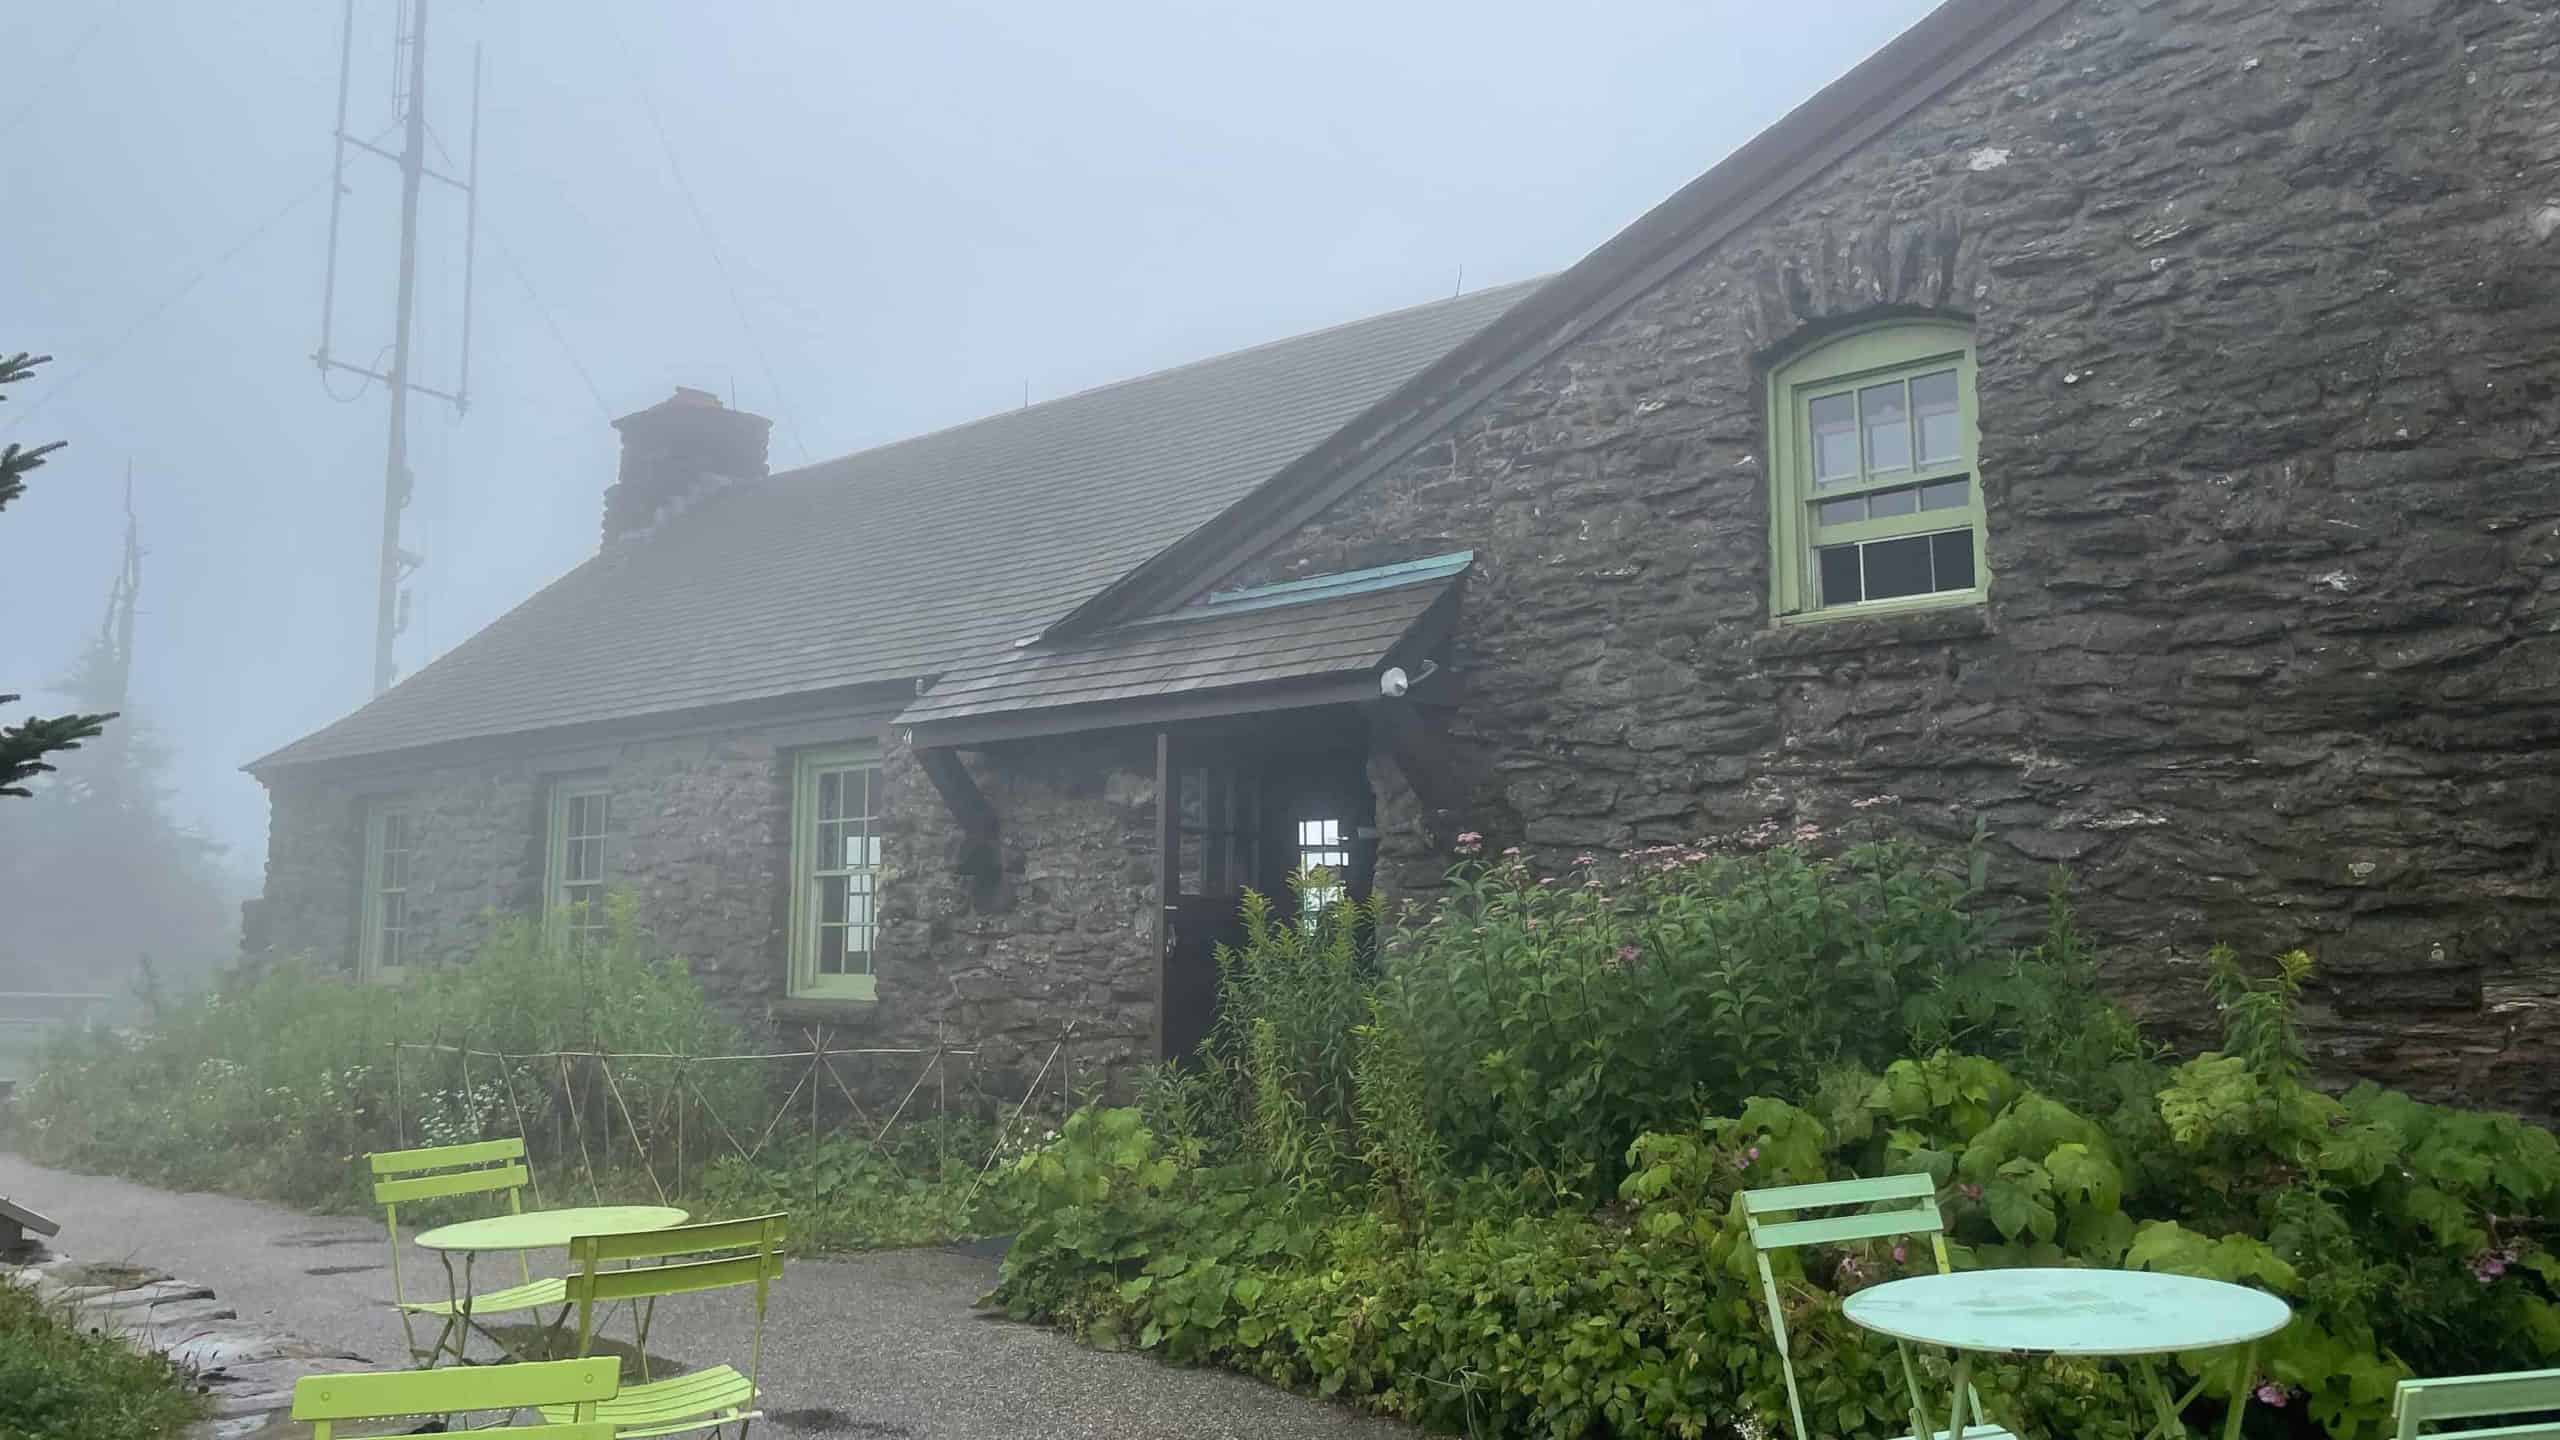 Bascom Lodge offers hot drinks on a damp summer day at the summit of Mount Greylock.